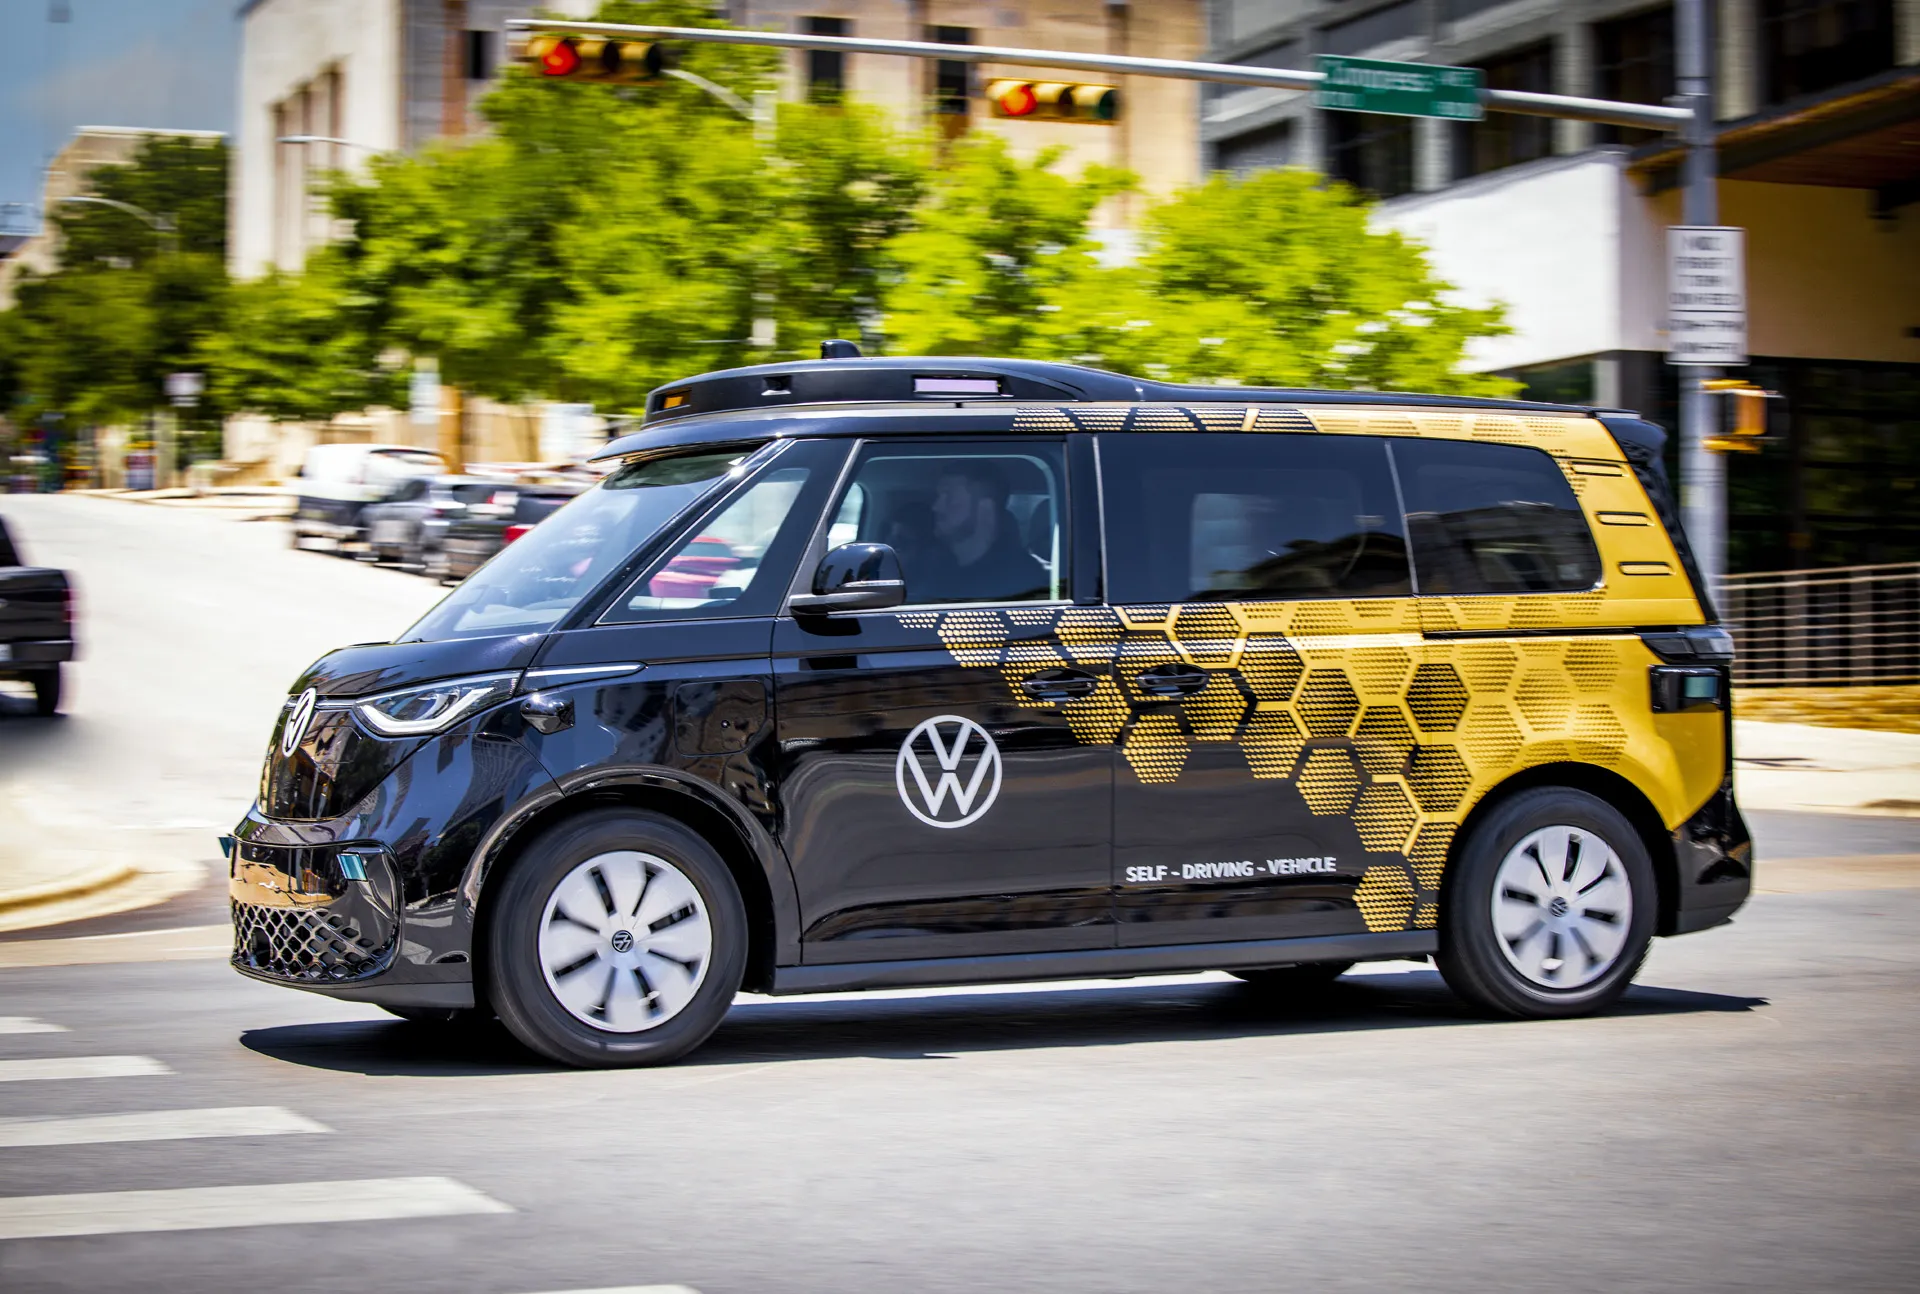 VW to use Mobileye self-driving system for robotaxi service Auto Recent